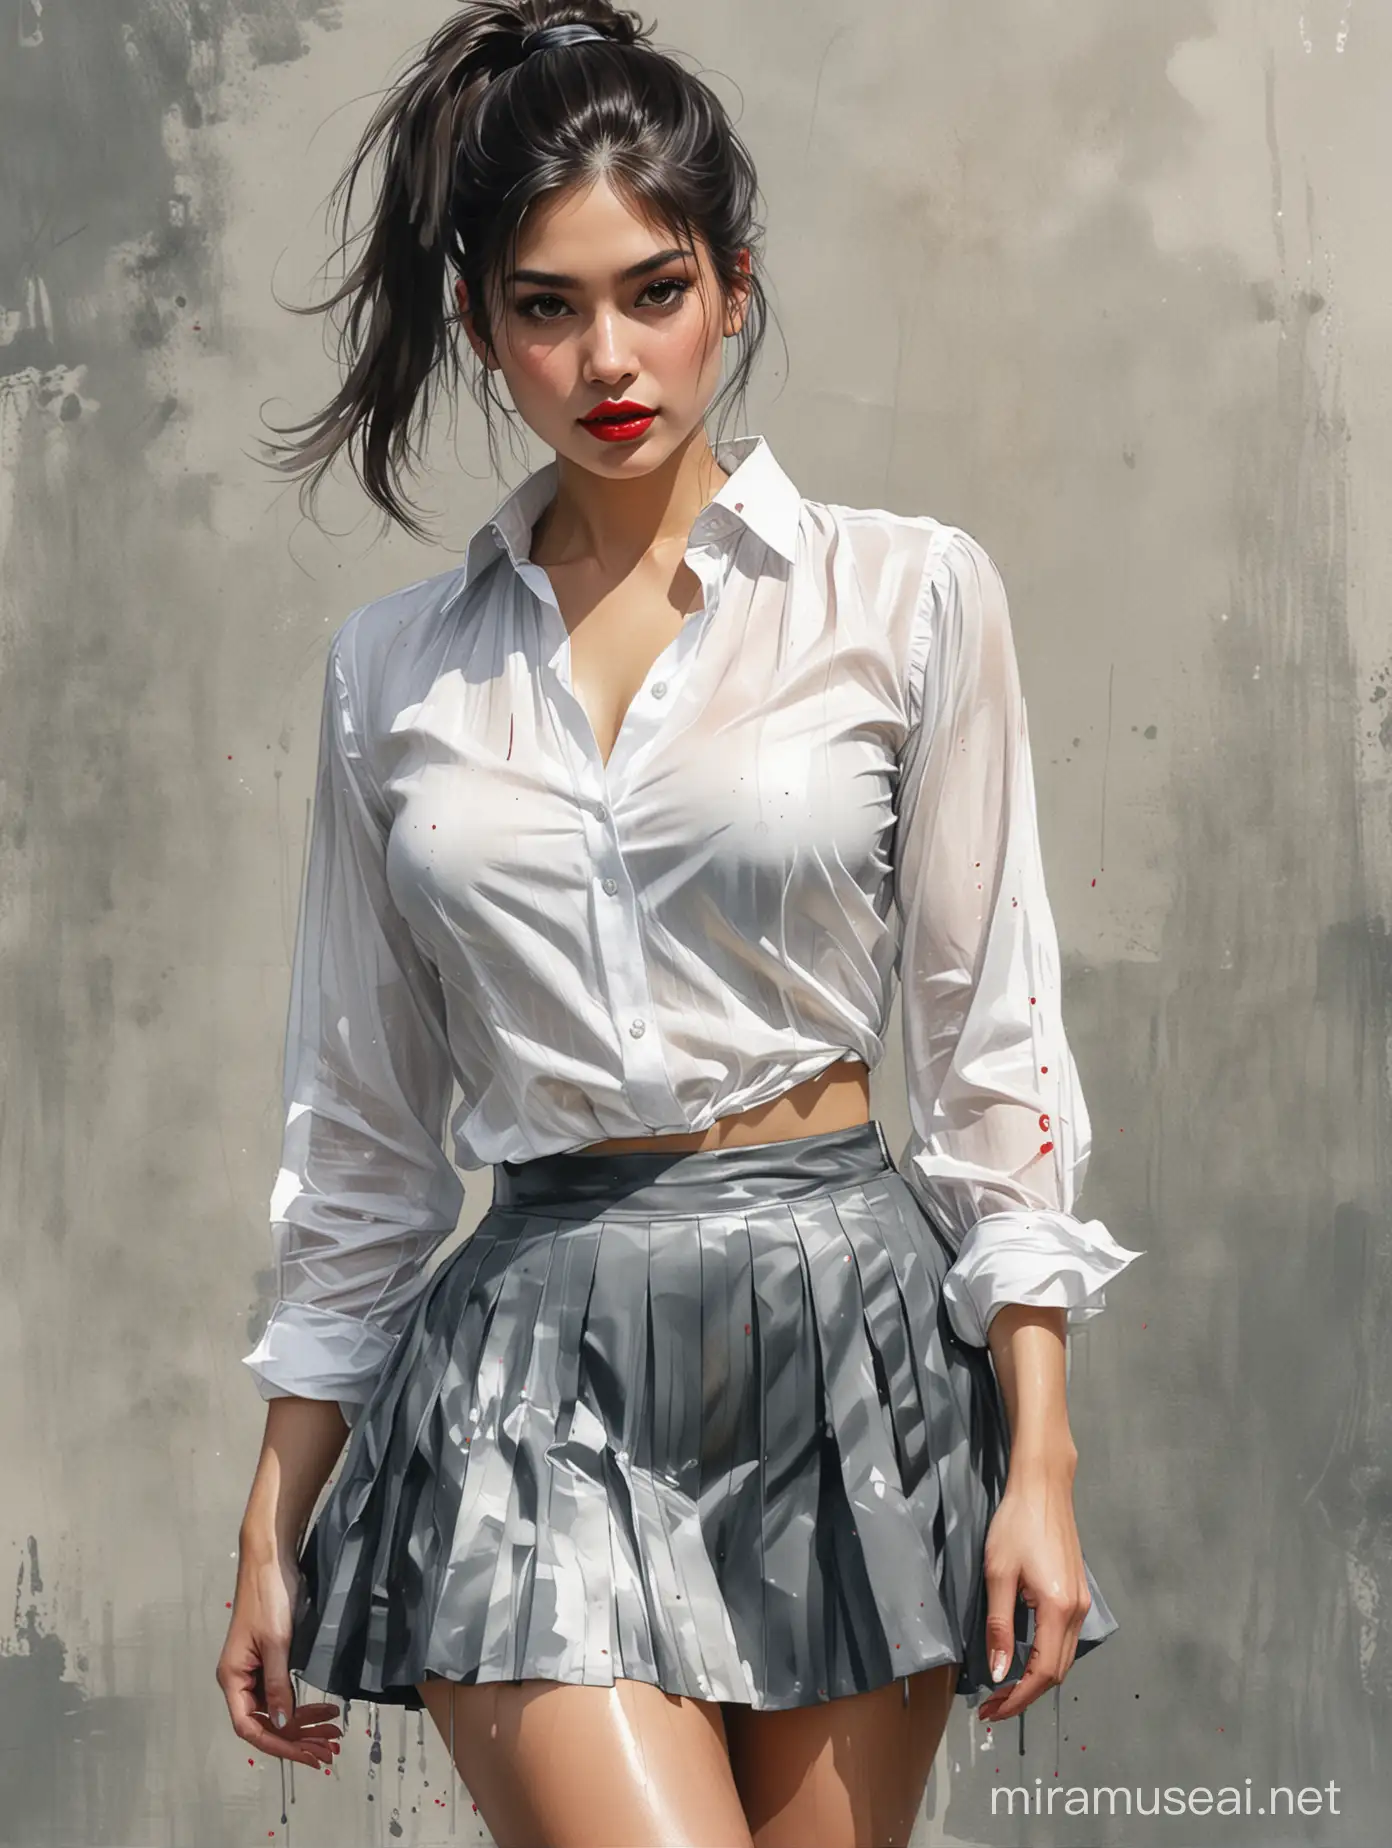 Alex Maleev illustration depicting Jane de Leon wearing blouse and pleated skirt, smooth shiny thighs, red lips, wet cleavage, ponytail hair, muscular build, No makeup, very delicate and thin lines, messy watercolor, no distortion, gray palette, insanely high detail, very high quality, extreme low angle view, seen from below